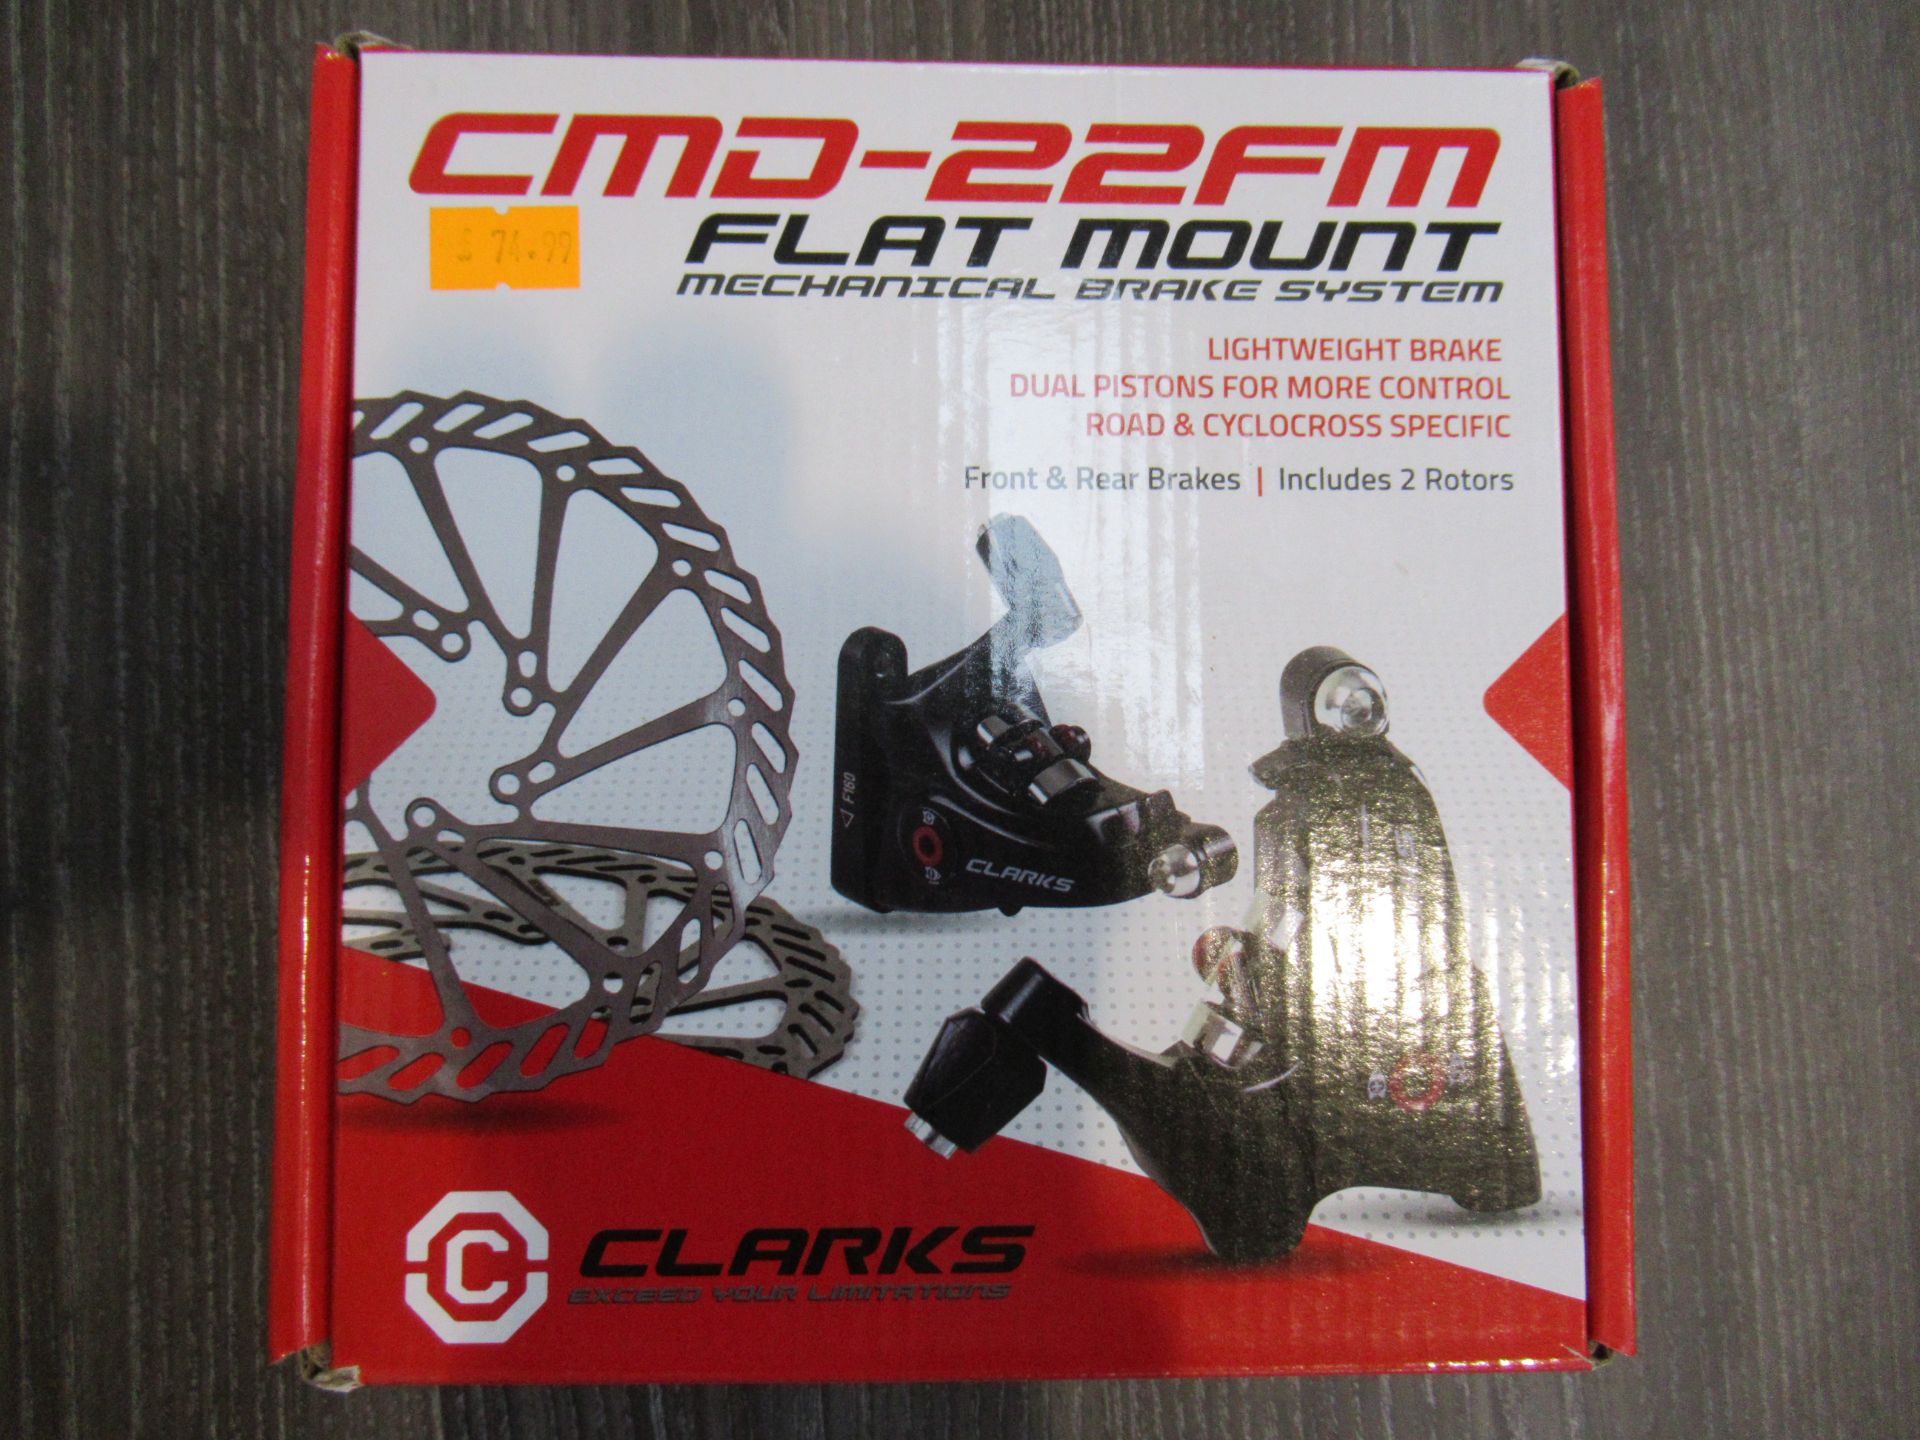 3 x Clarks CMD-22FM Flat Mount Mechanical Brake systems - 1 x missing rear set (RRP£54.99) 2 x compl - Image 3 of 4